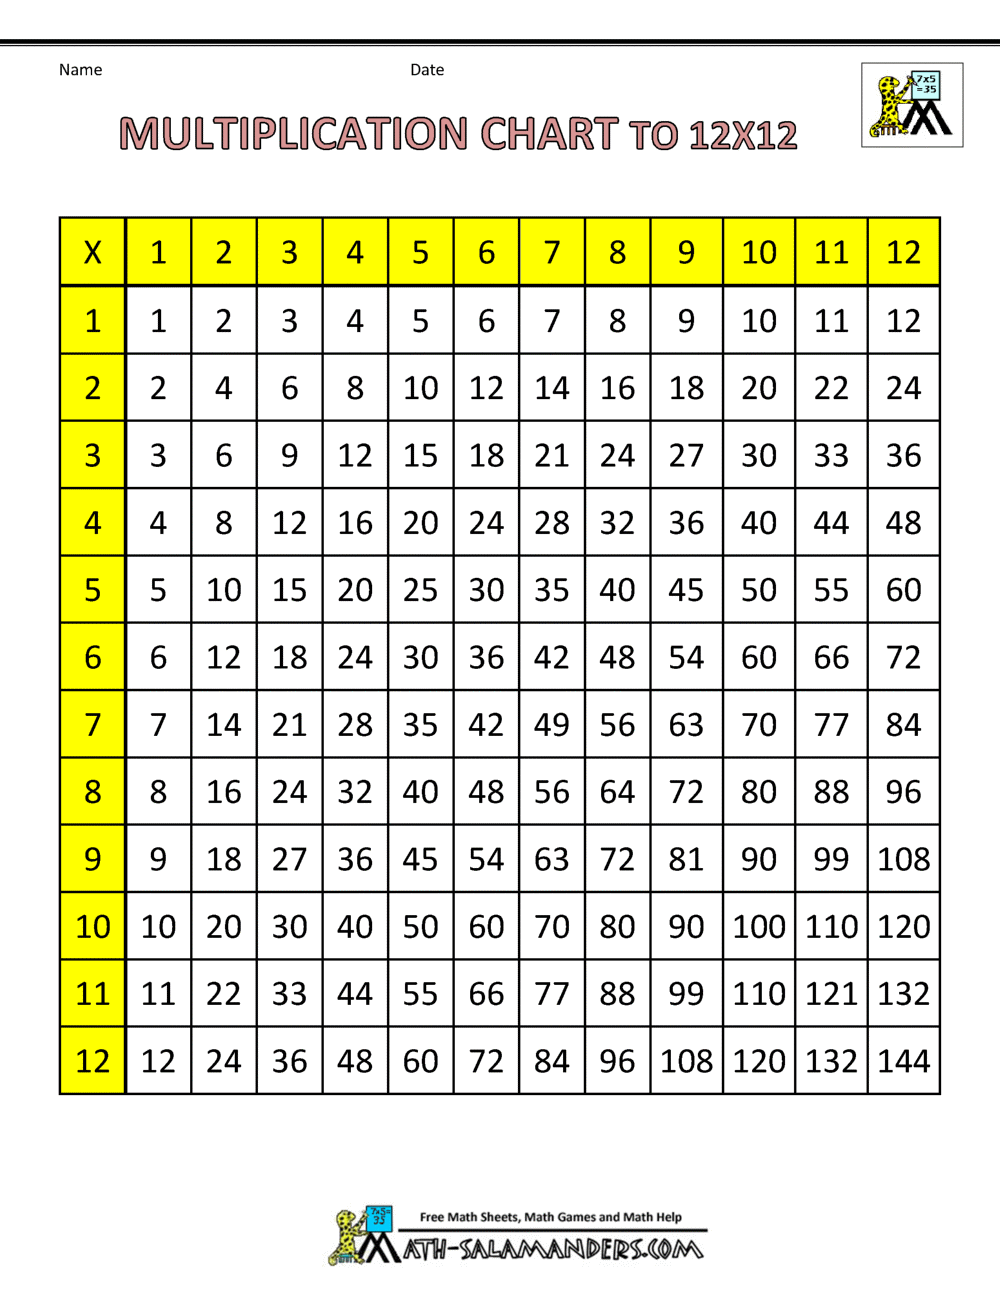 Times Tables Practice Worksheets 24 pages booklet With FREE EXTRAS see details 